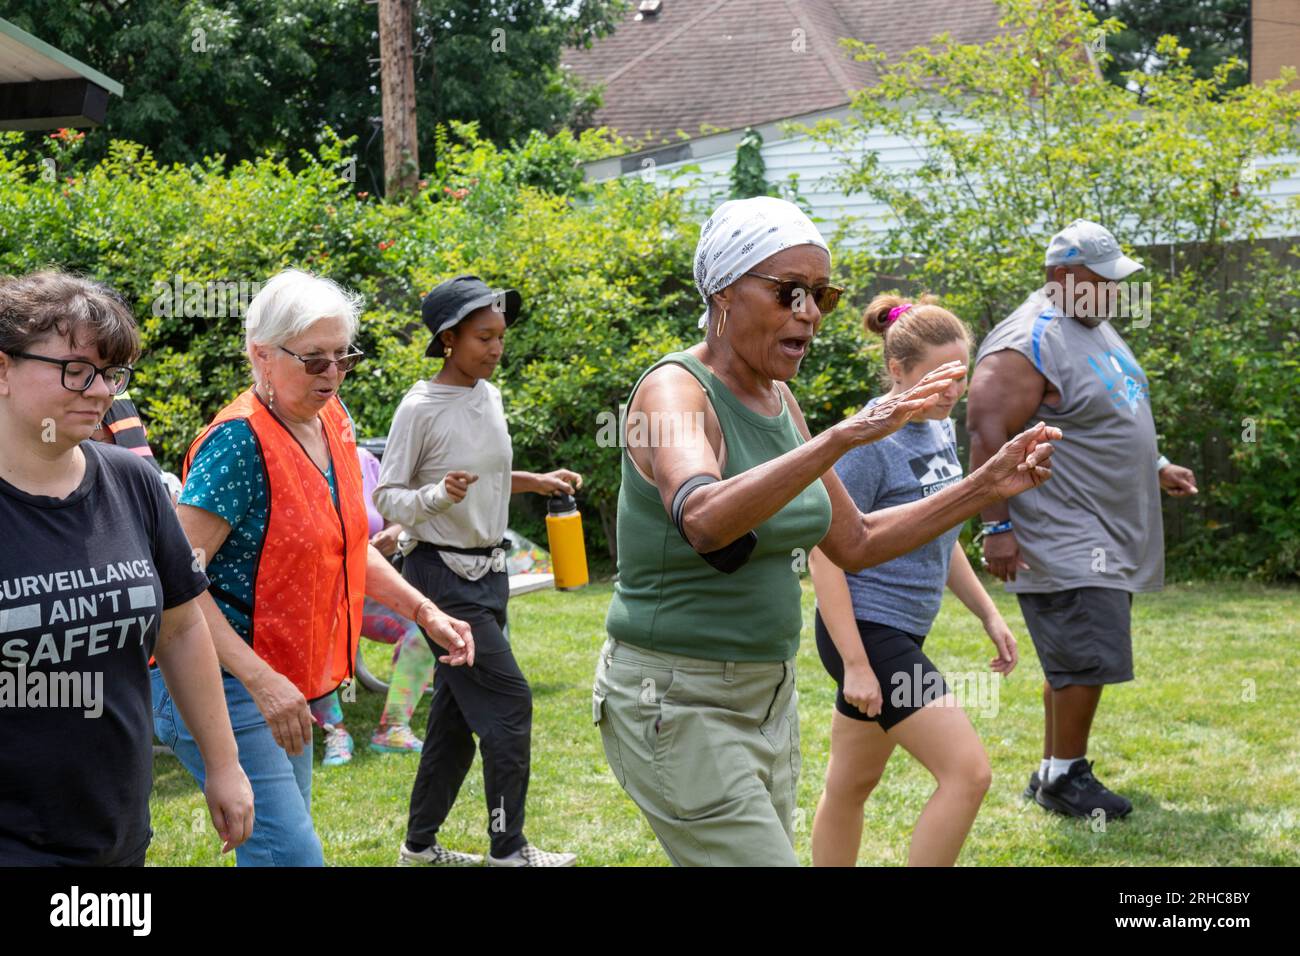 Detroit, Michigan - Bea Davis (green top) teaches the Hustle as residents of the Morningside dance during their picnic/party called the 'Summer Sizzle Stock Photo